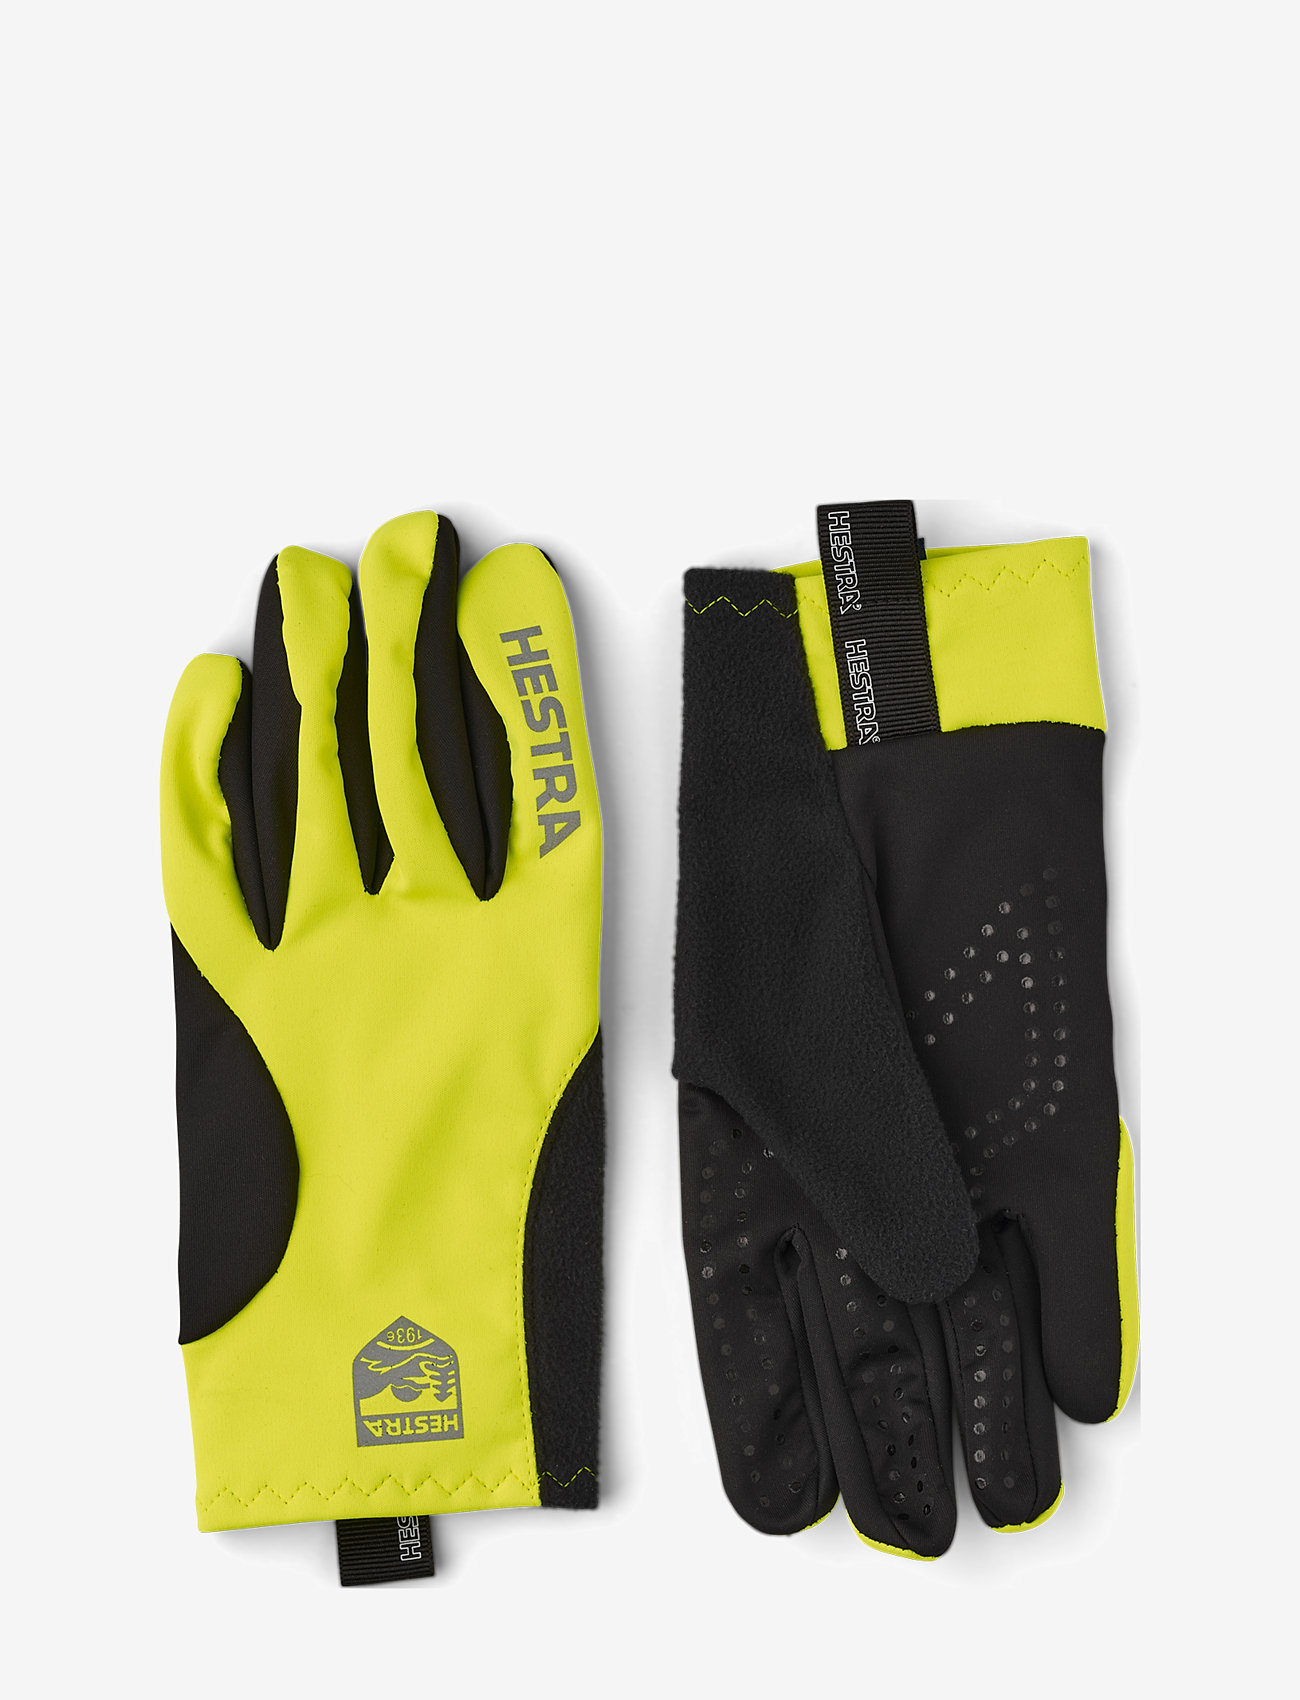 Hestra - Runners All Weather - 5 finger - mehed - yellow high viz - 0